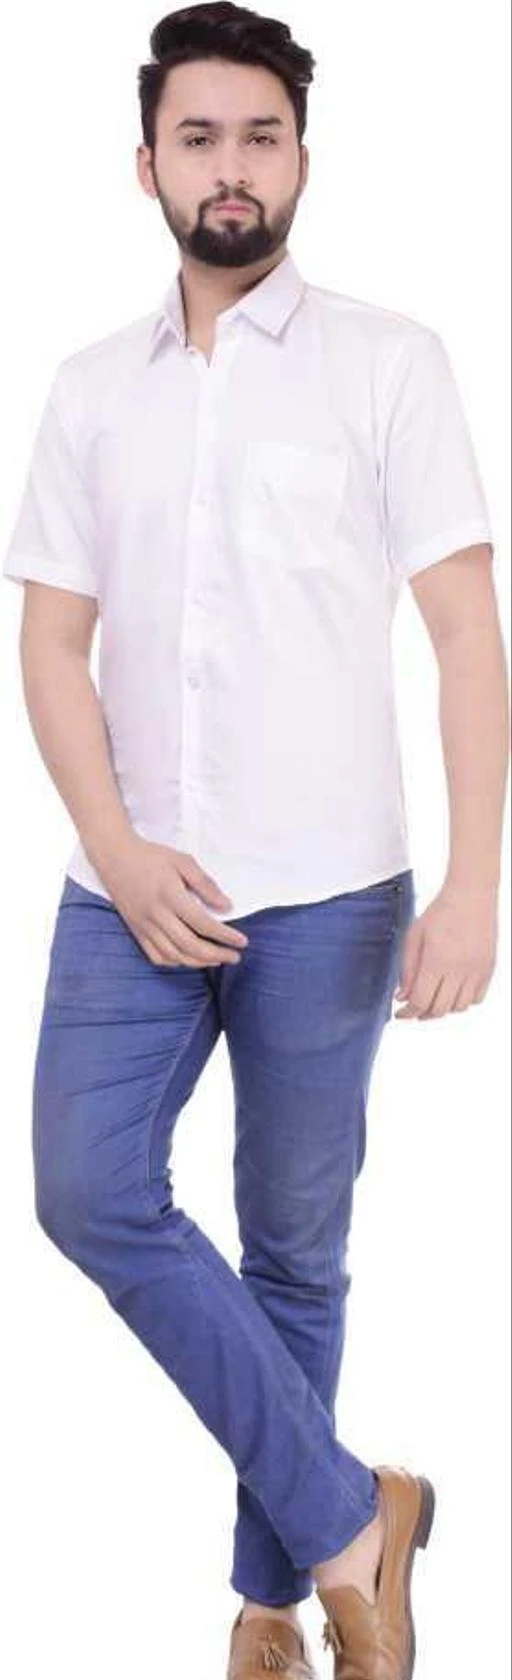 Checkout this latest Shirts
Product Name: *Elite Elegant Men's Shirts*
Fabric: Cotton
Sleeve Length: Short Sleeves
Pattern: Solid
Net Quantity (N): 1
Sizes:
M (Chest Size: 40 in, Length Size: 28 in) 
L (Chest Size: 42 in, Length Size: 29 in) 
XL (Chest Size: 44 in, Length Size: 30 in) 
XXL (Chest Size: 46 in, Length Size: 31 in) 
Easy Returns Available In Case Of Any Issue


SKU: DS13_White
Supplier Name: VINAY_ENTPR001

Code: 862-5030774-927

Catalog Name: Elite Elegant Men's Shirts
CatalogID_739253
M06-C14-SC1206